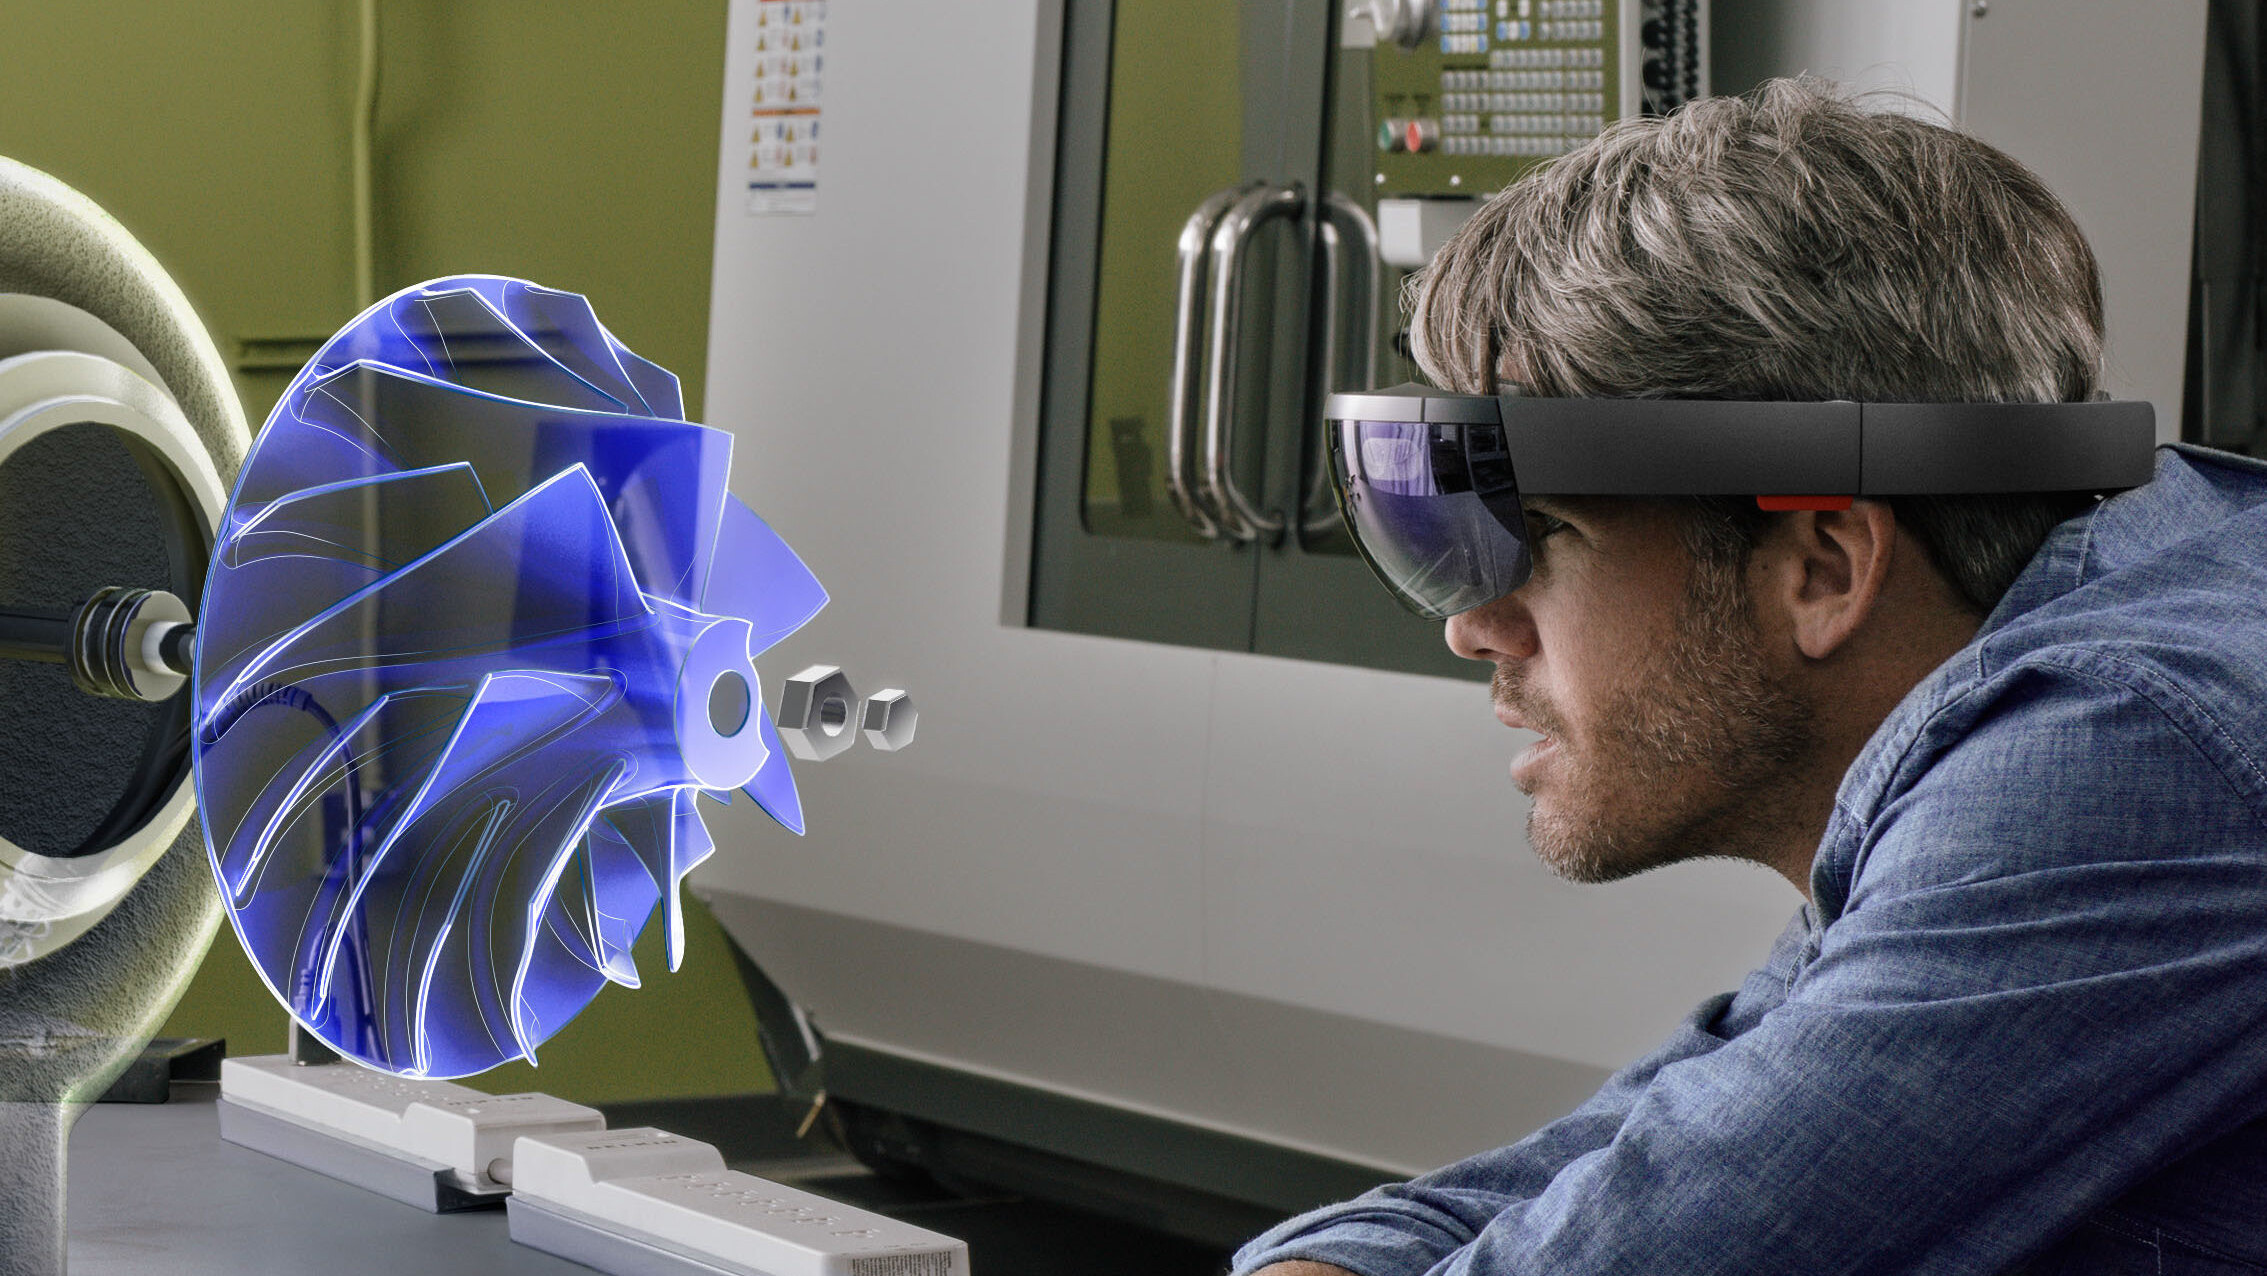 Sign up to try the Hololens in New York from today